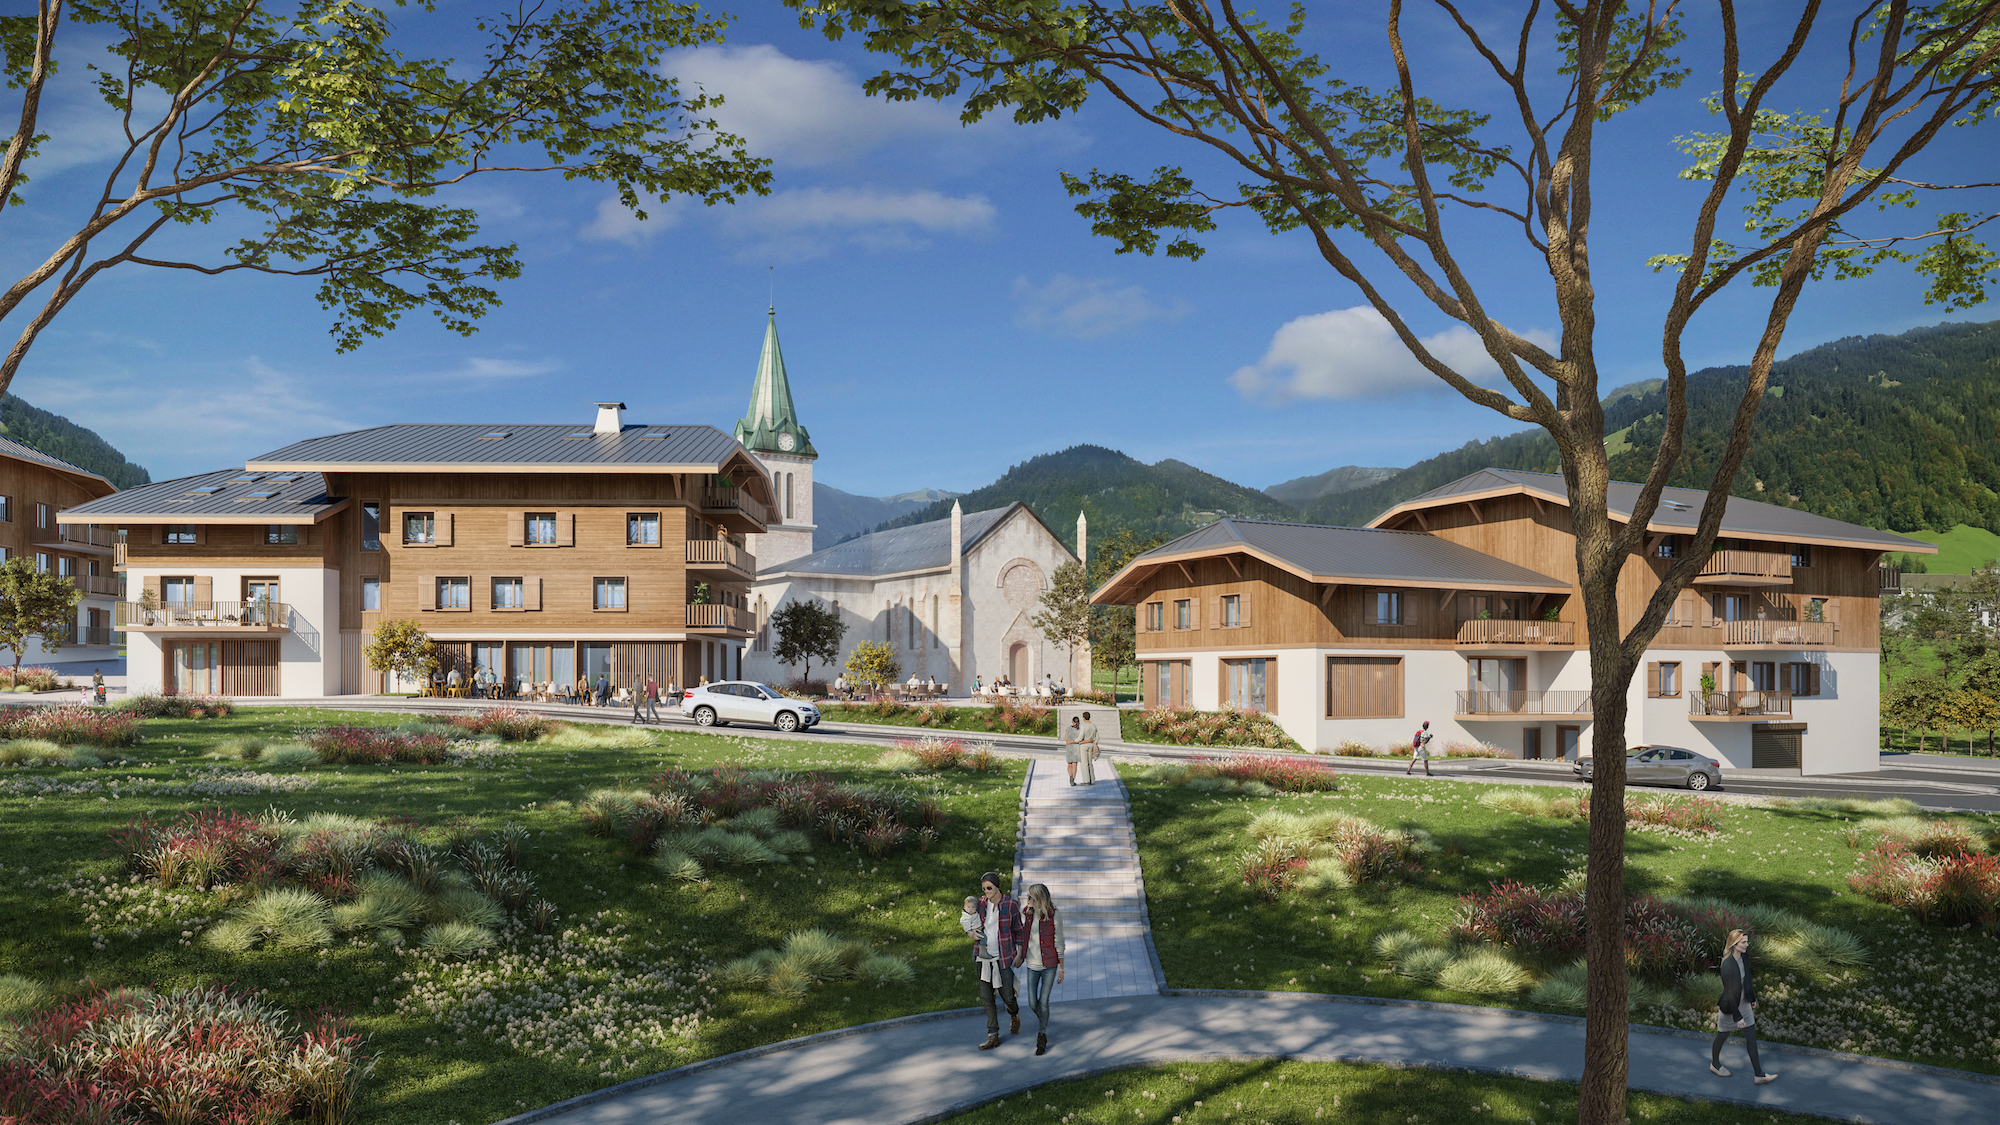 Commercial launch for Chalets Saint-Victor, the new program in Praz-sur-Arly - Property market news